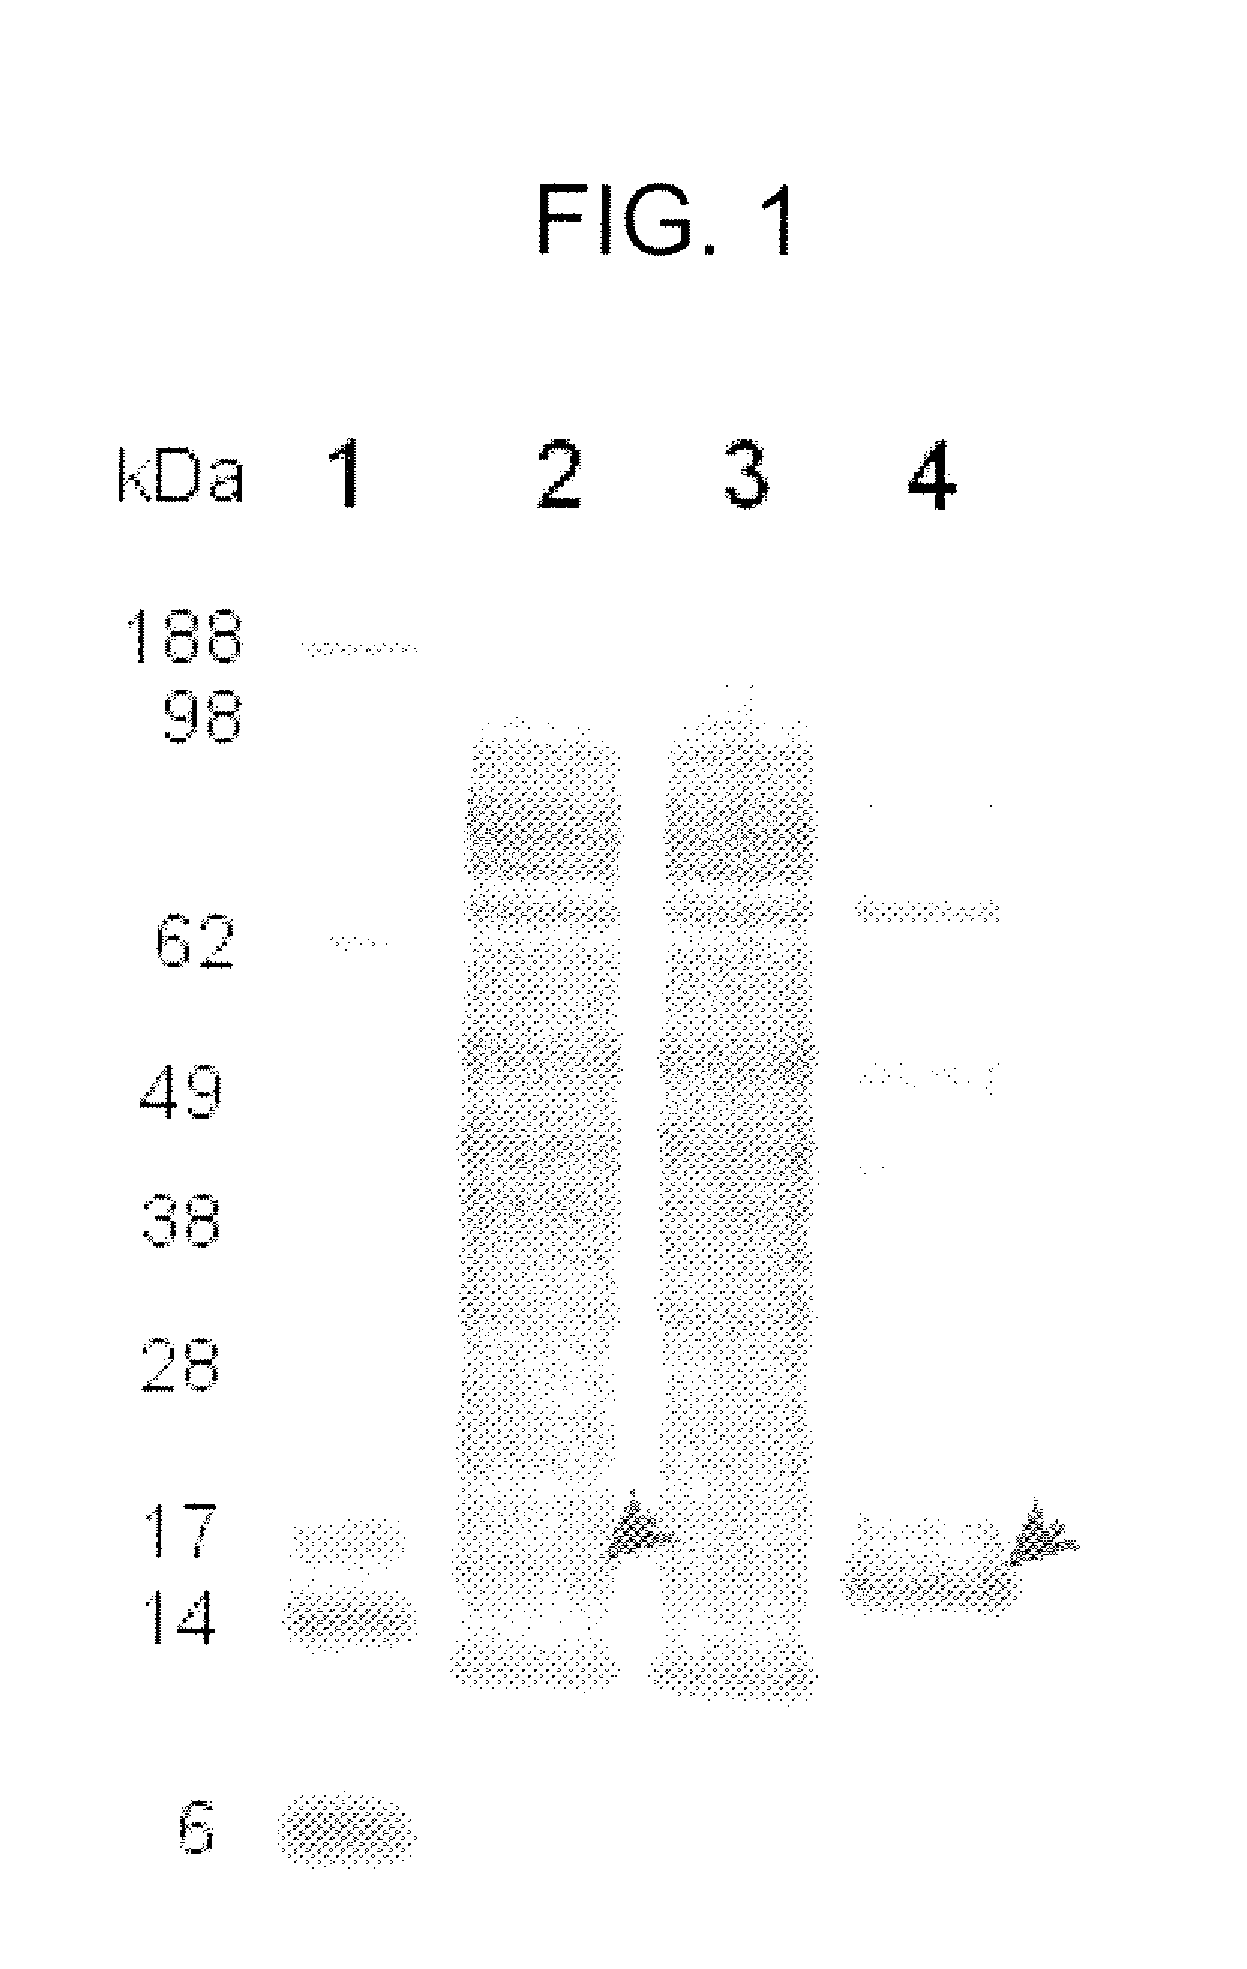 Canine Thymic Stromal Lymphopoietin Protein and Uses Thereof